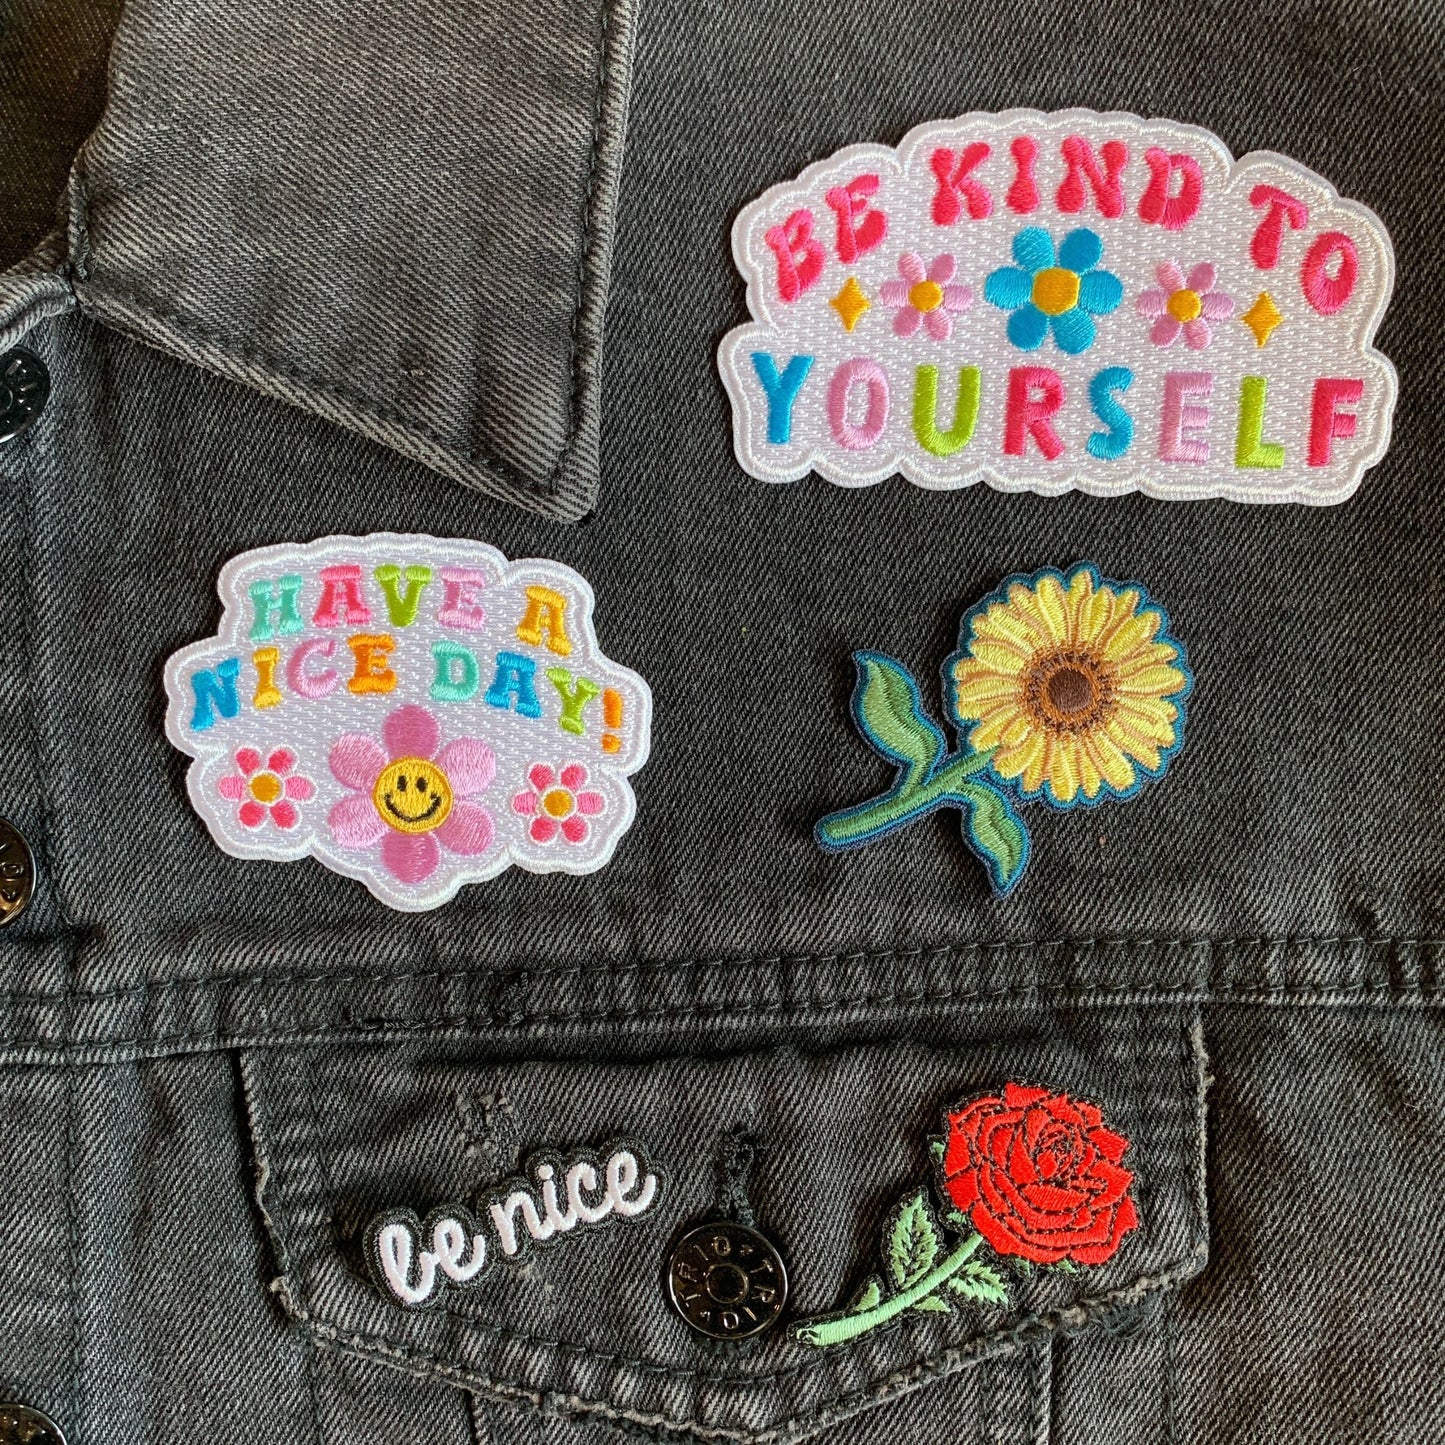 Be Kind to Yourself Positivity Quote Iron On Patches | Embroidered Applique